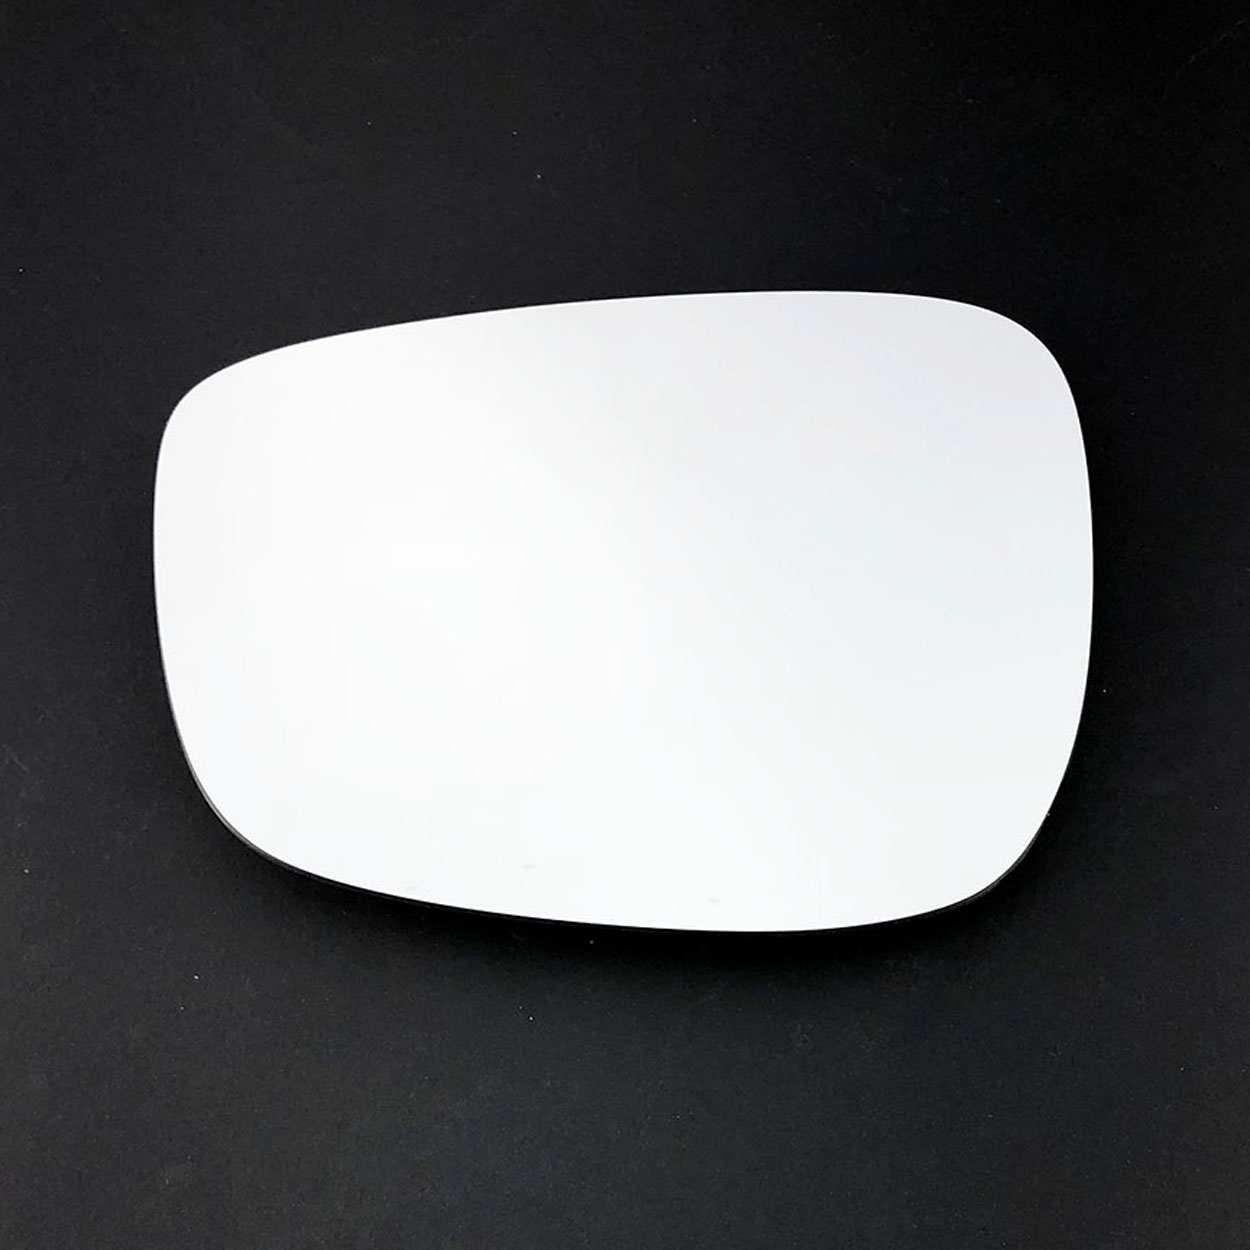 Mazda CX 5 Wing Mirror Glass LEFT HAND ( UK Passenger Side ) 2012 to 2018 – Convex Wing Mirror